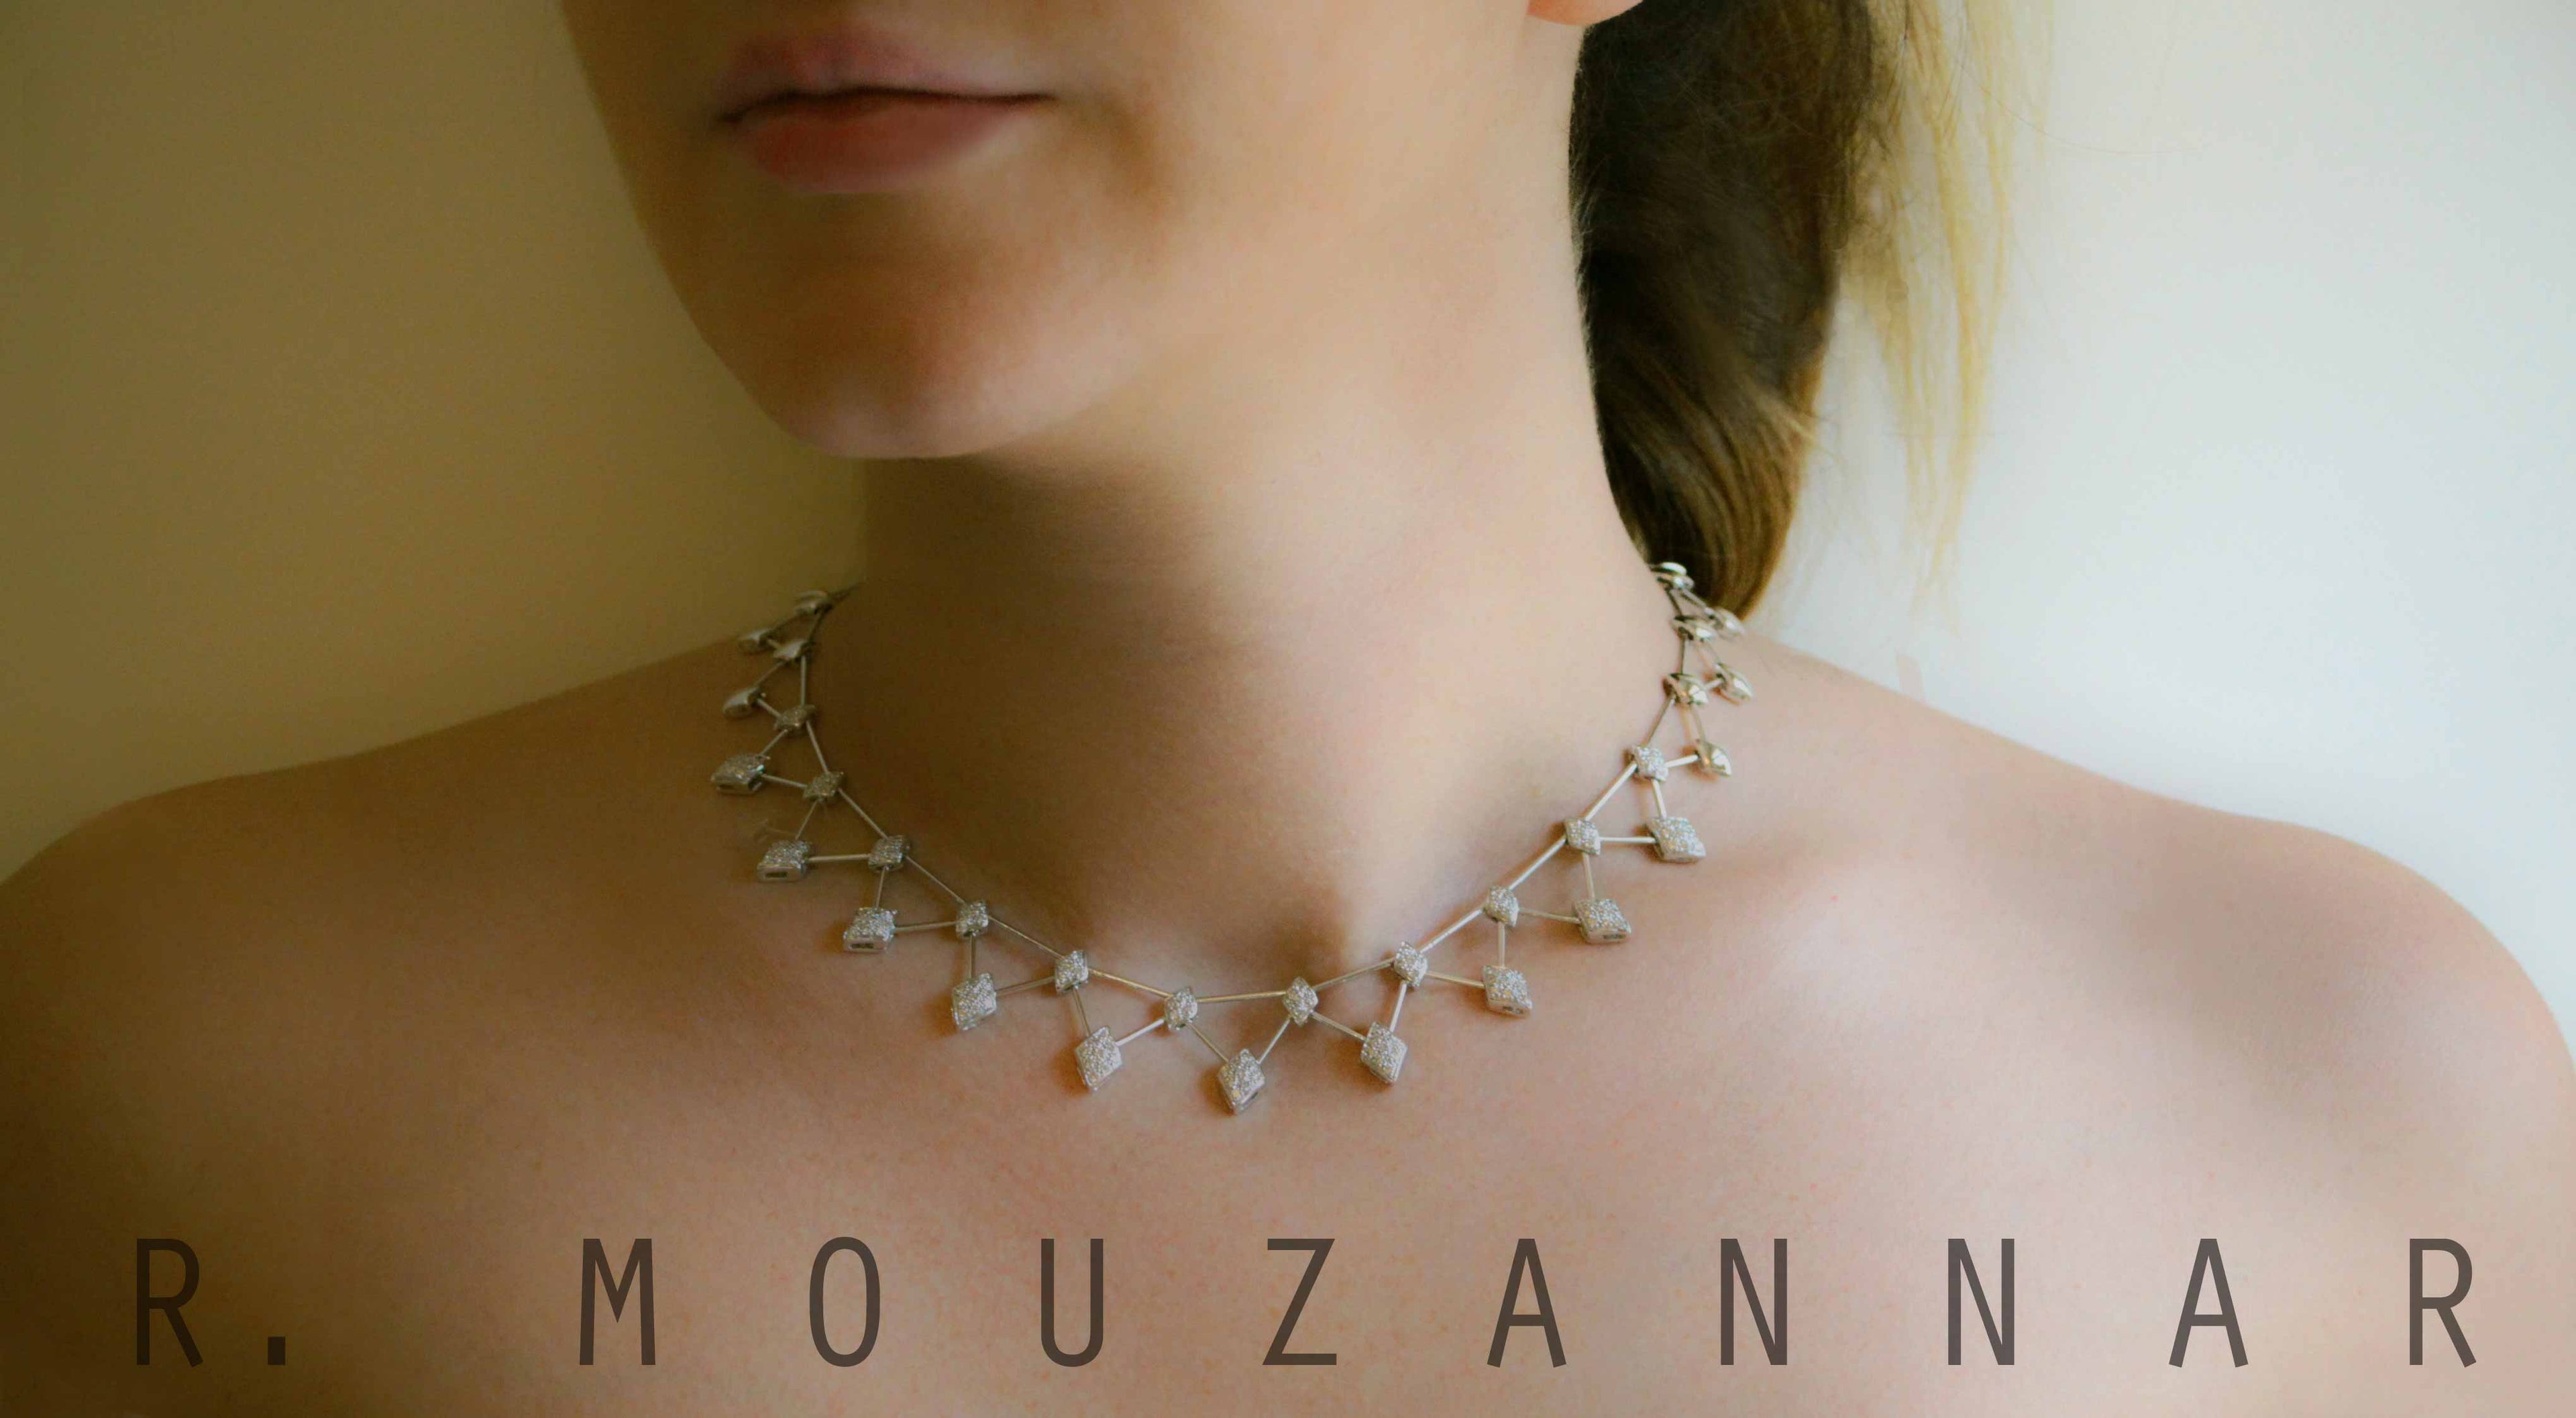 A Model wearing a diamond necklace from the fine jewelry collection of r mouzannar usa